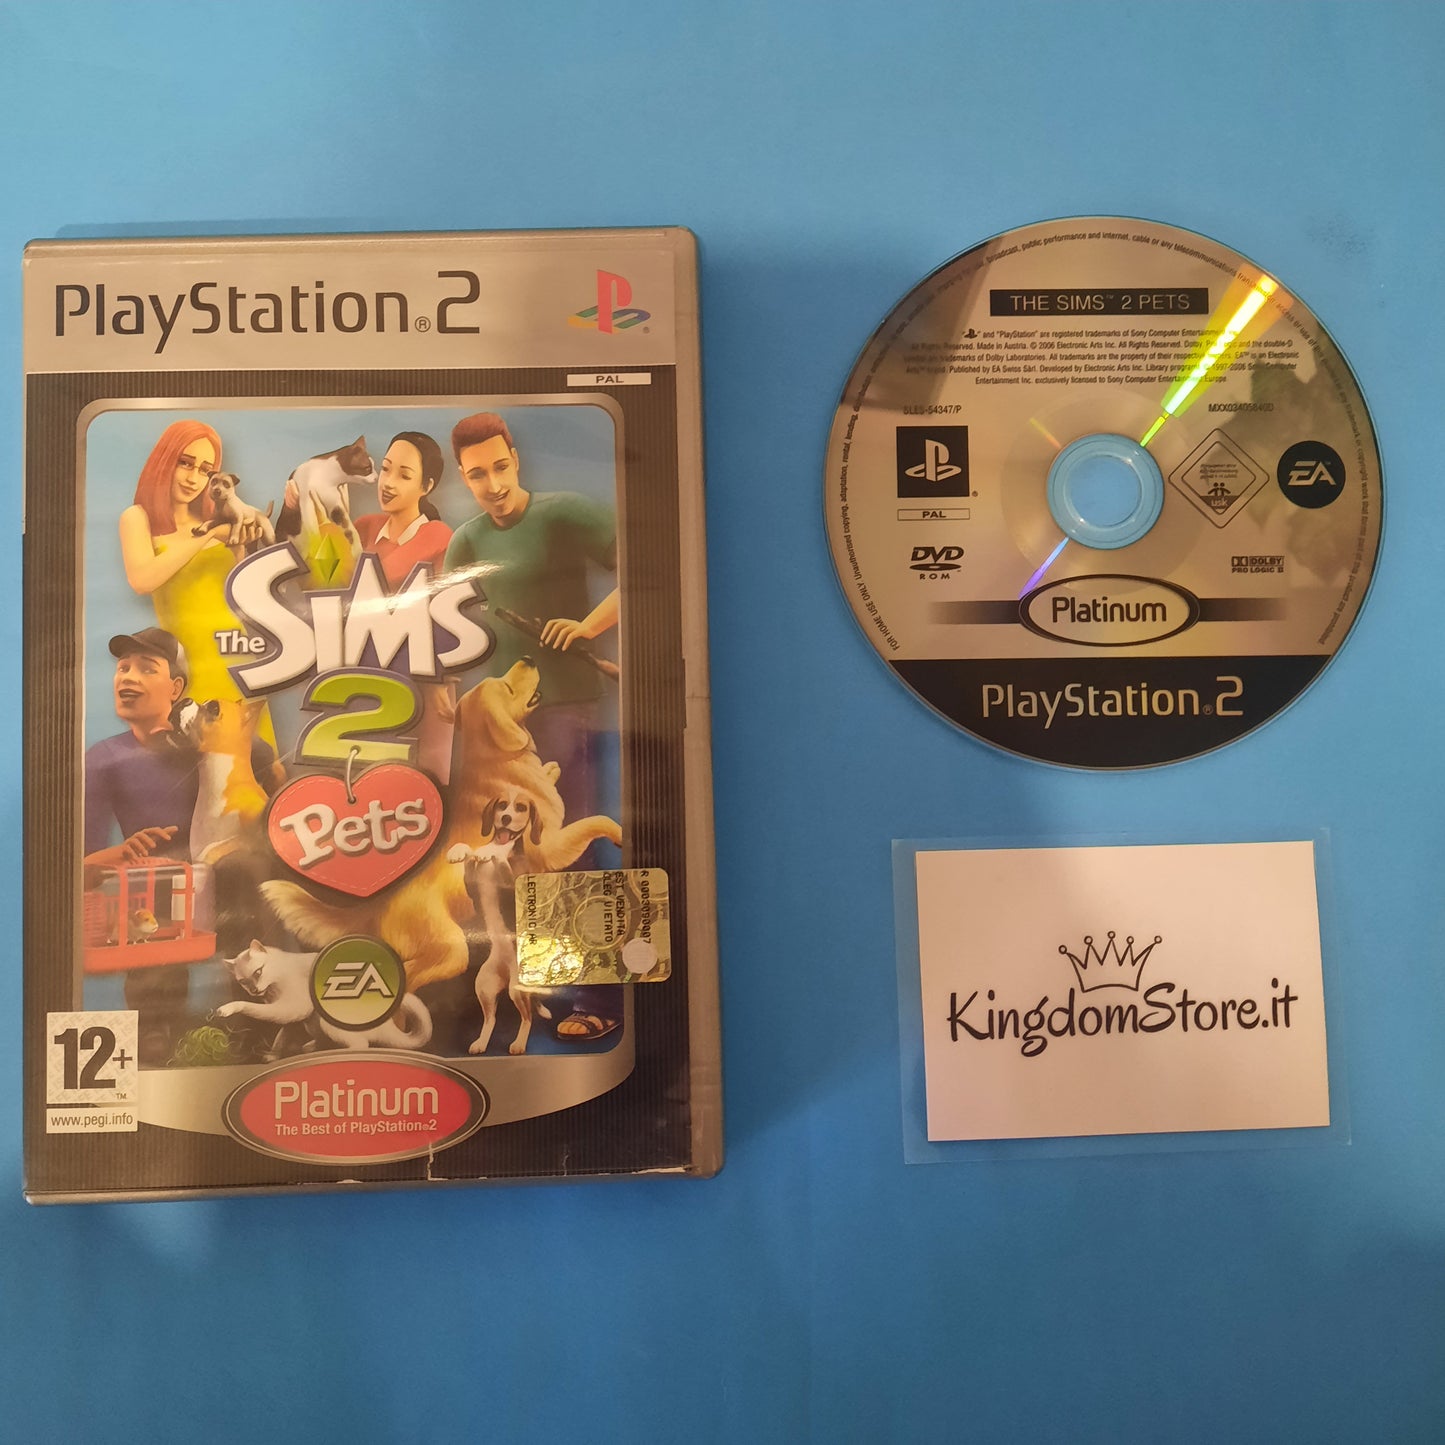 The Sims 2 Pets - Playstation 2 Ps2 - Platinum